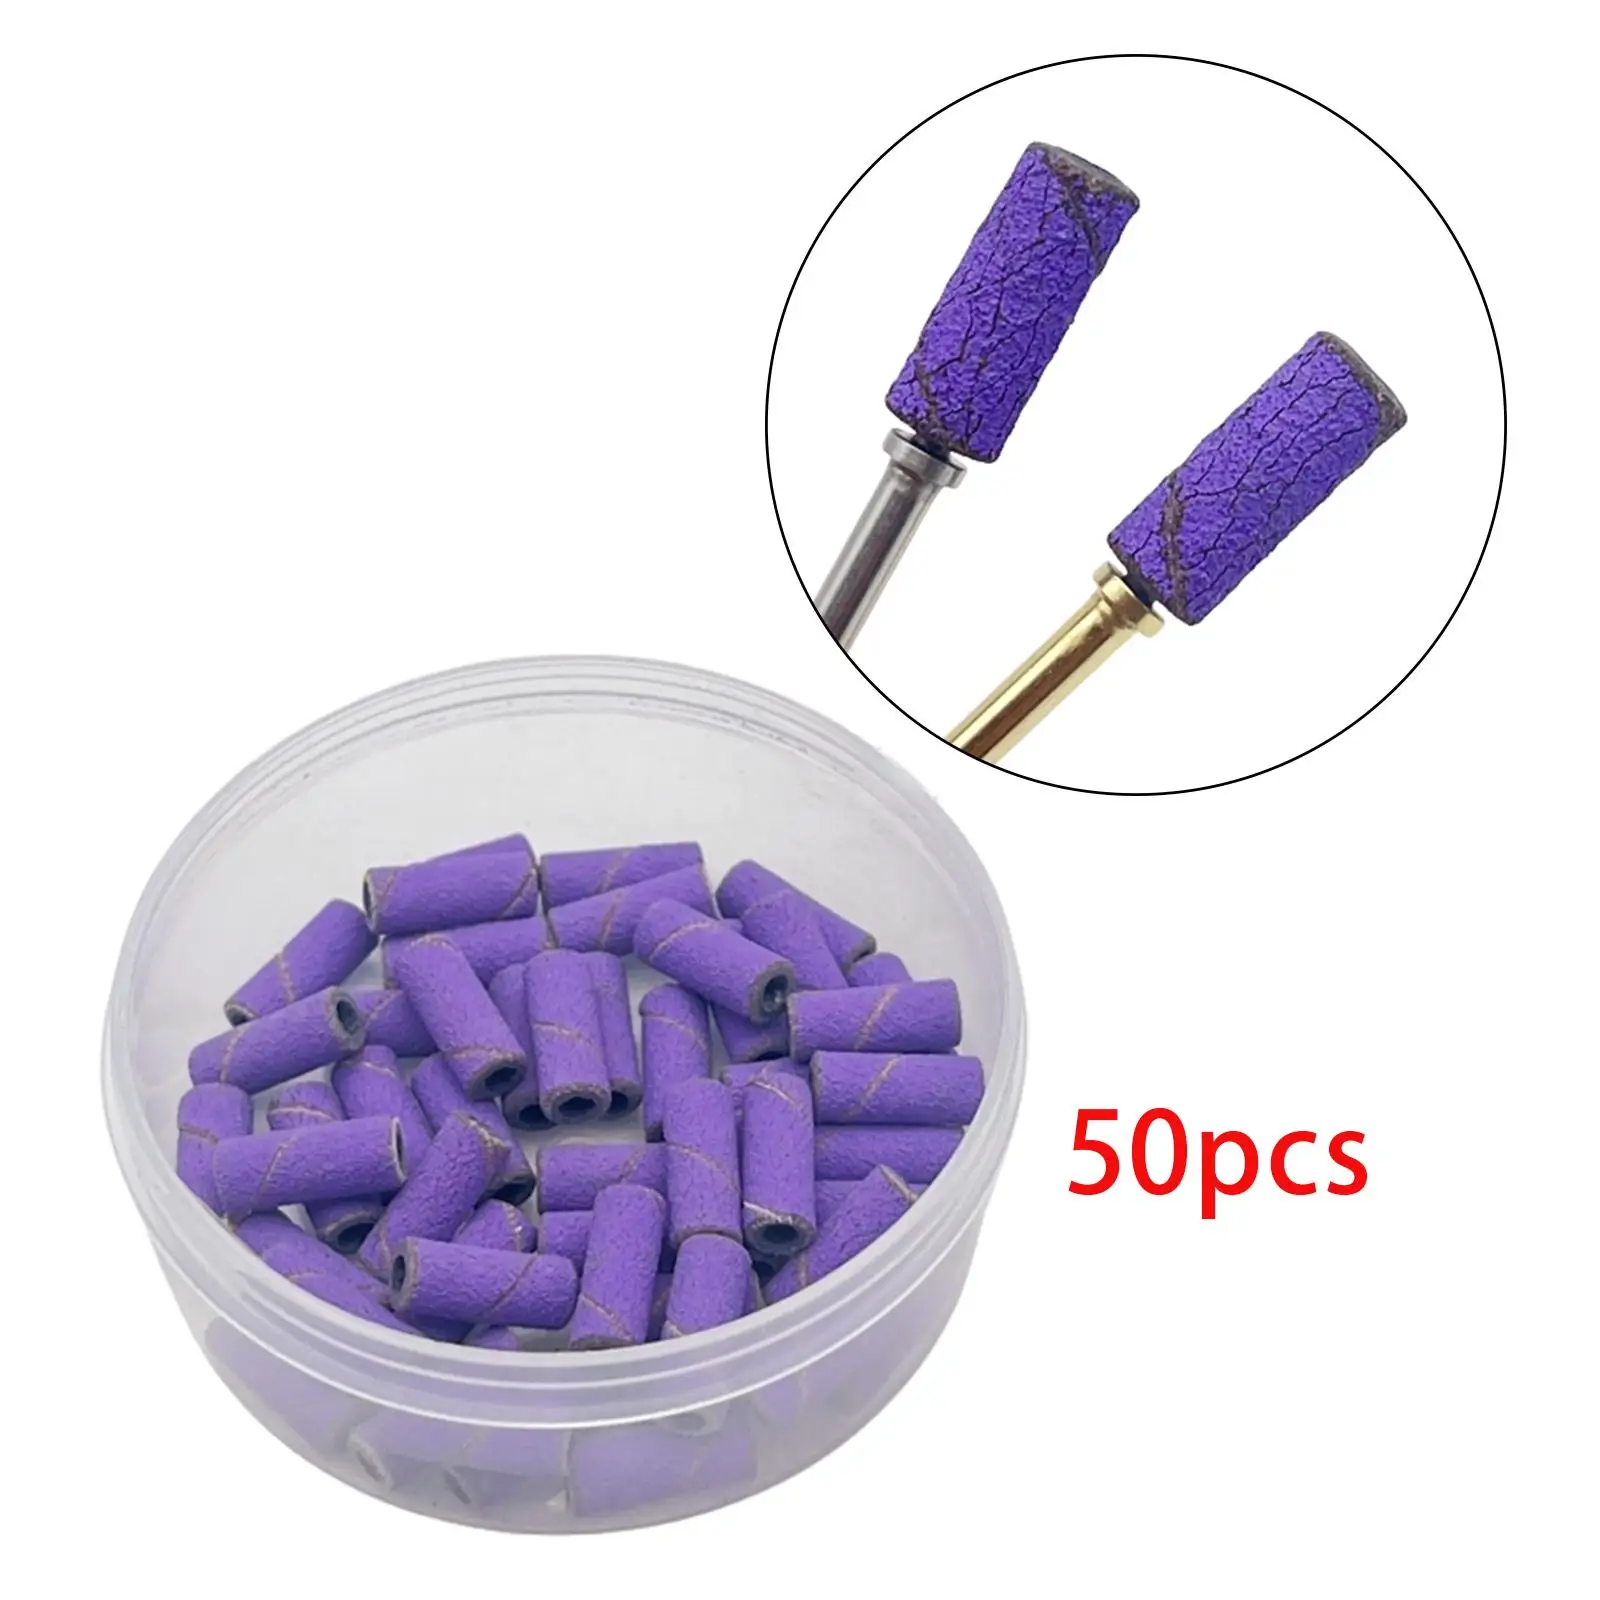 50 Pieces Mini Nail Sanding Bands High Quality Manicure Accessories Tool for 3.1mm Electric Manicure Nail Polishers Girls Women